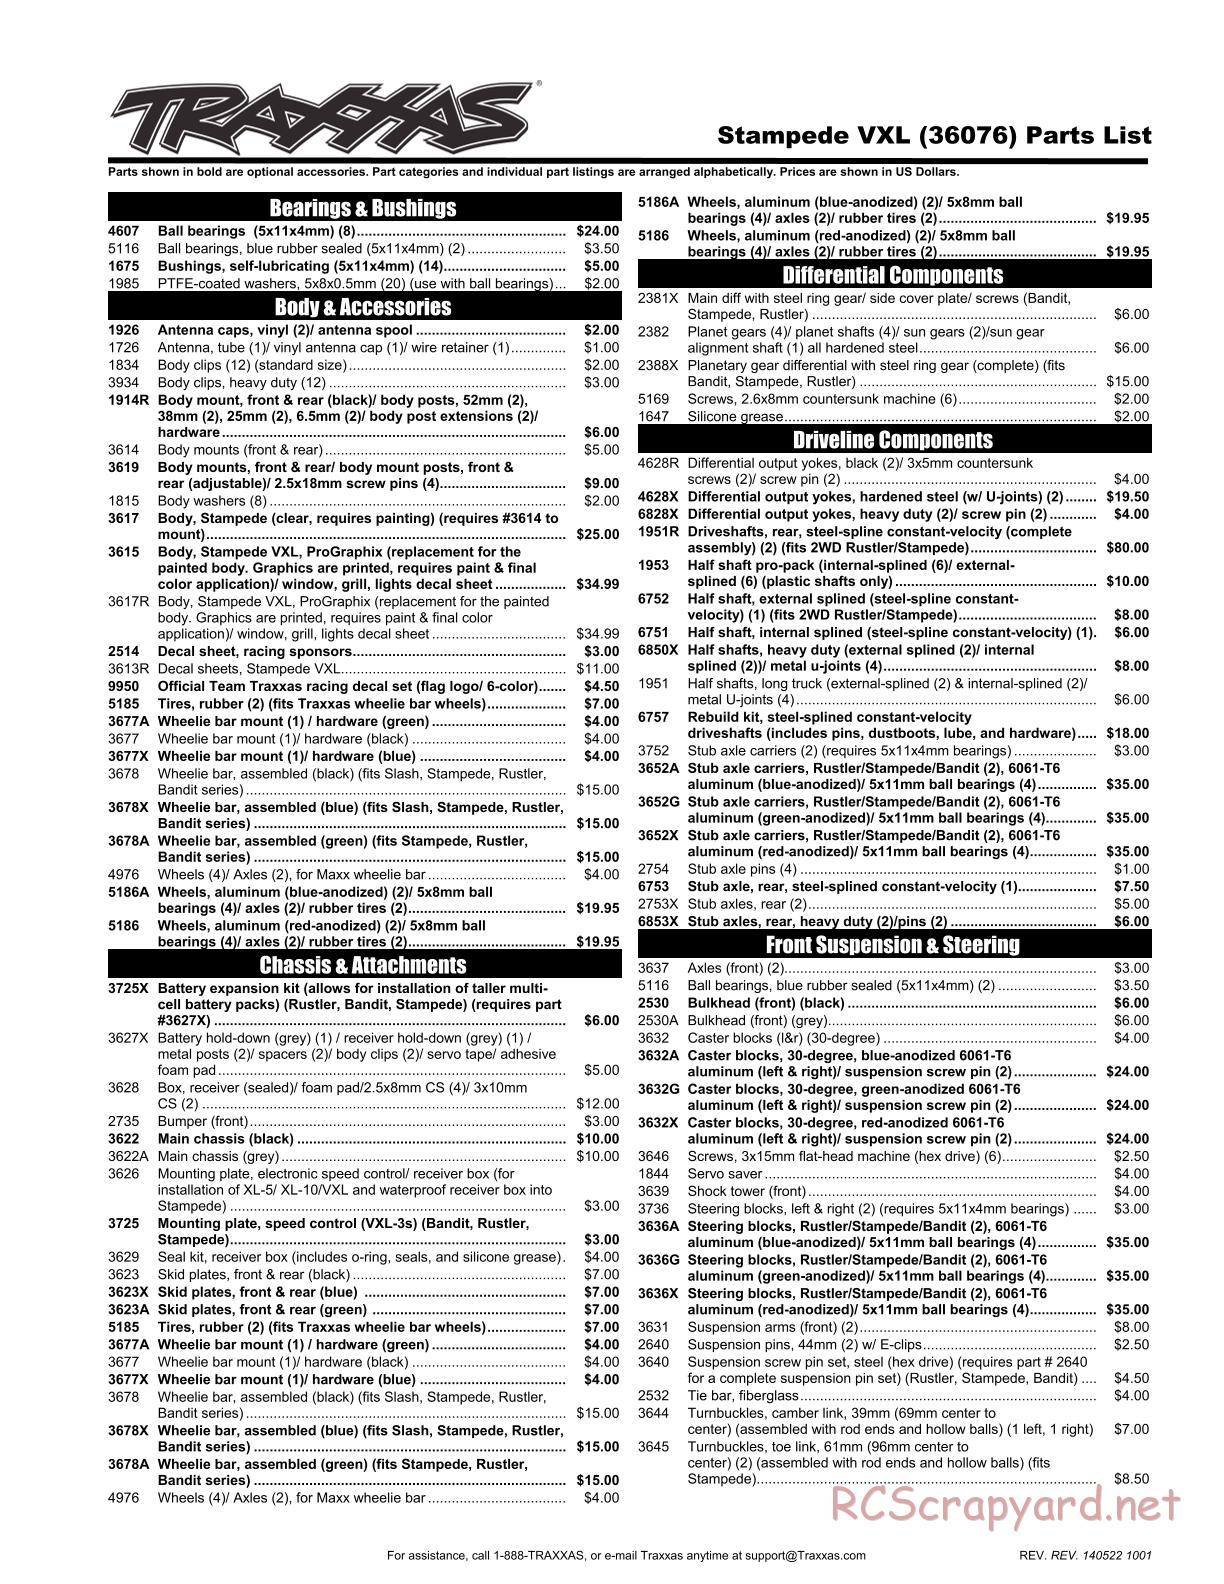 Traxxas - Stampede VXL - Parts List - Page 1